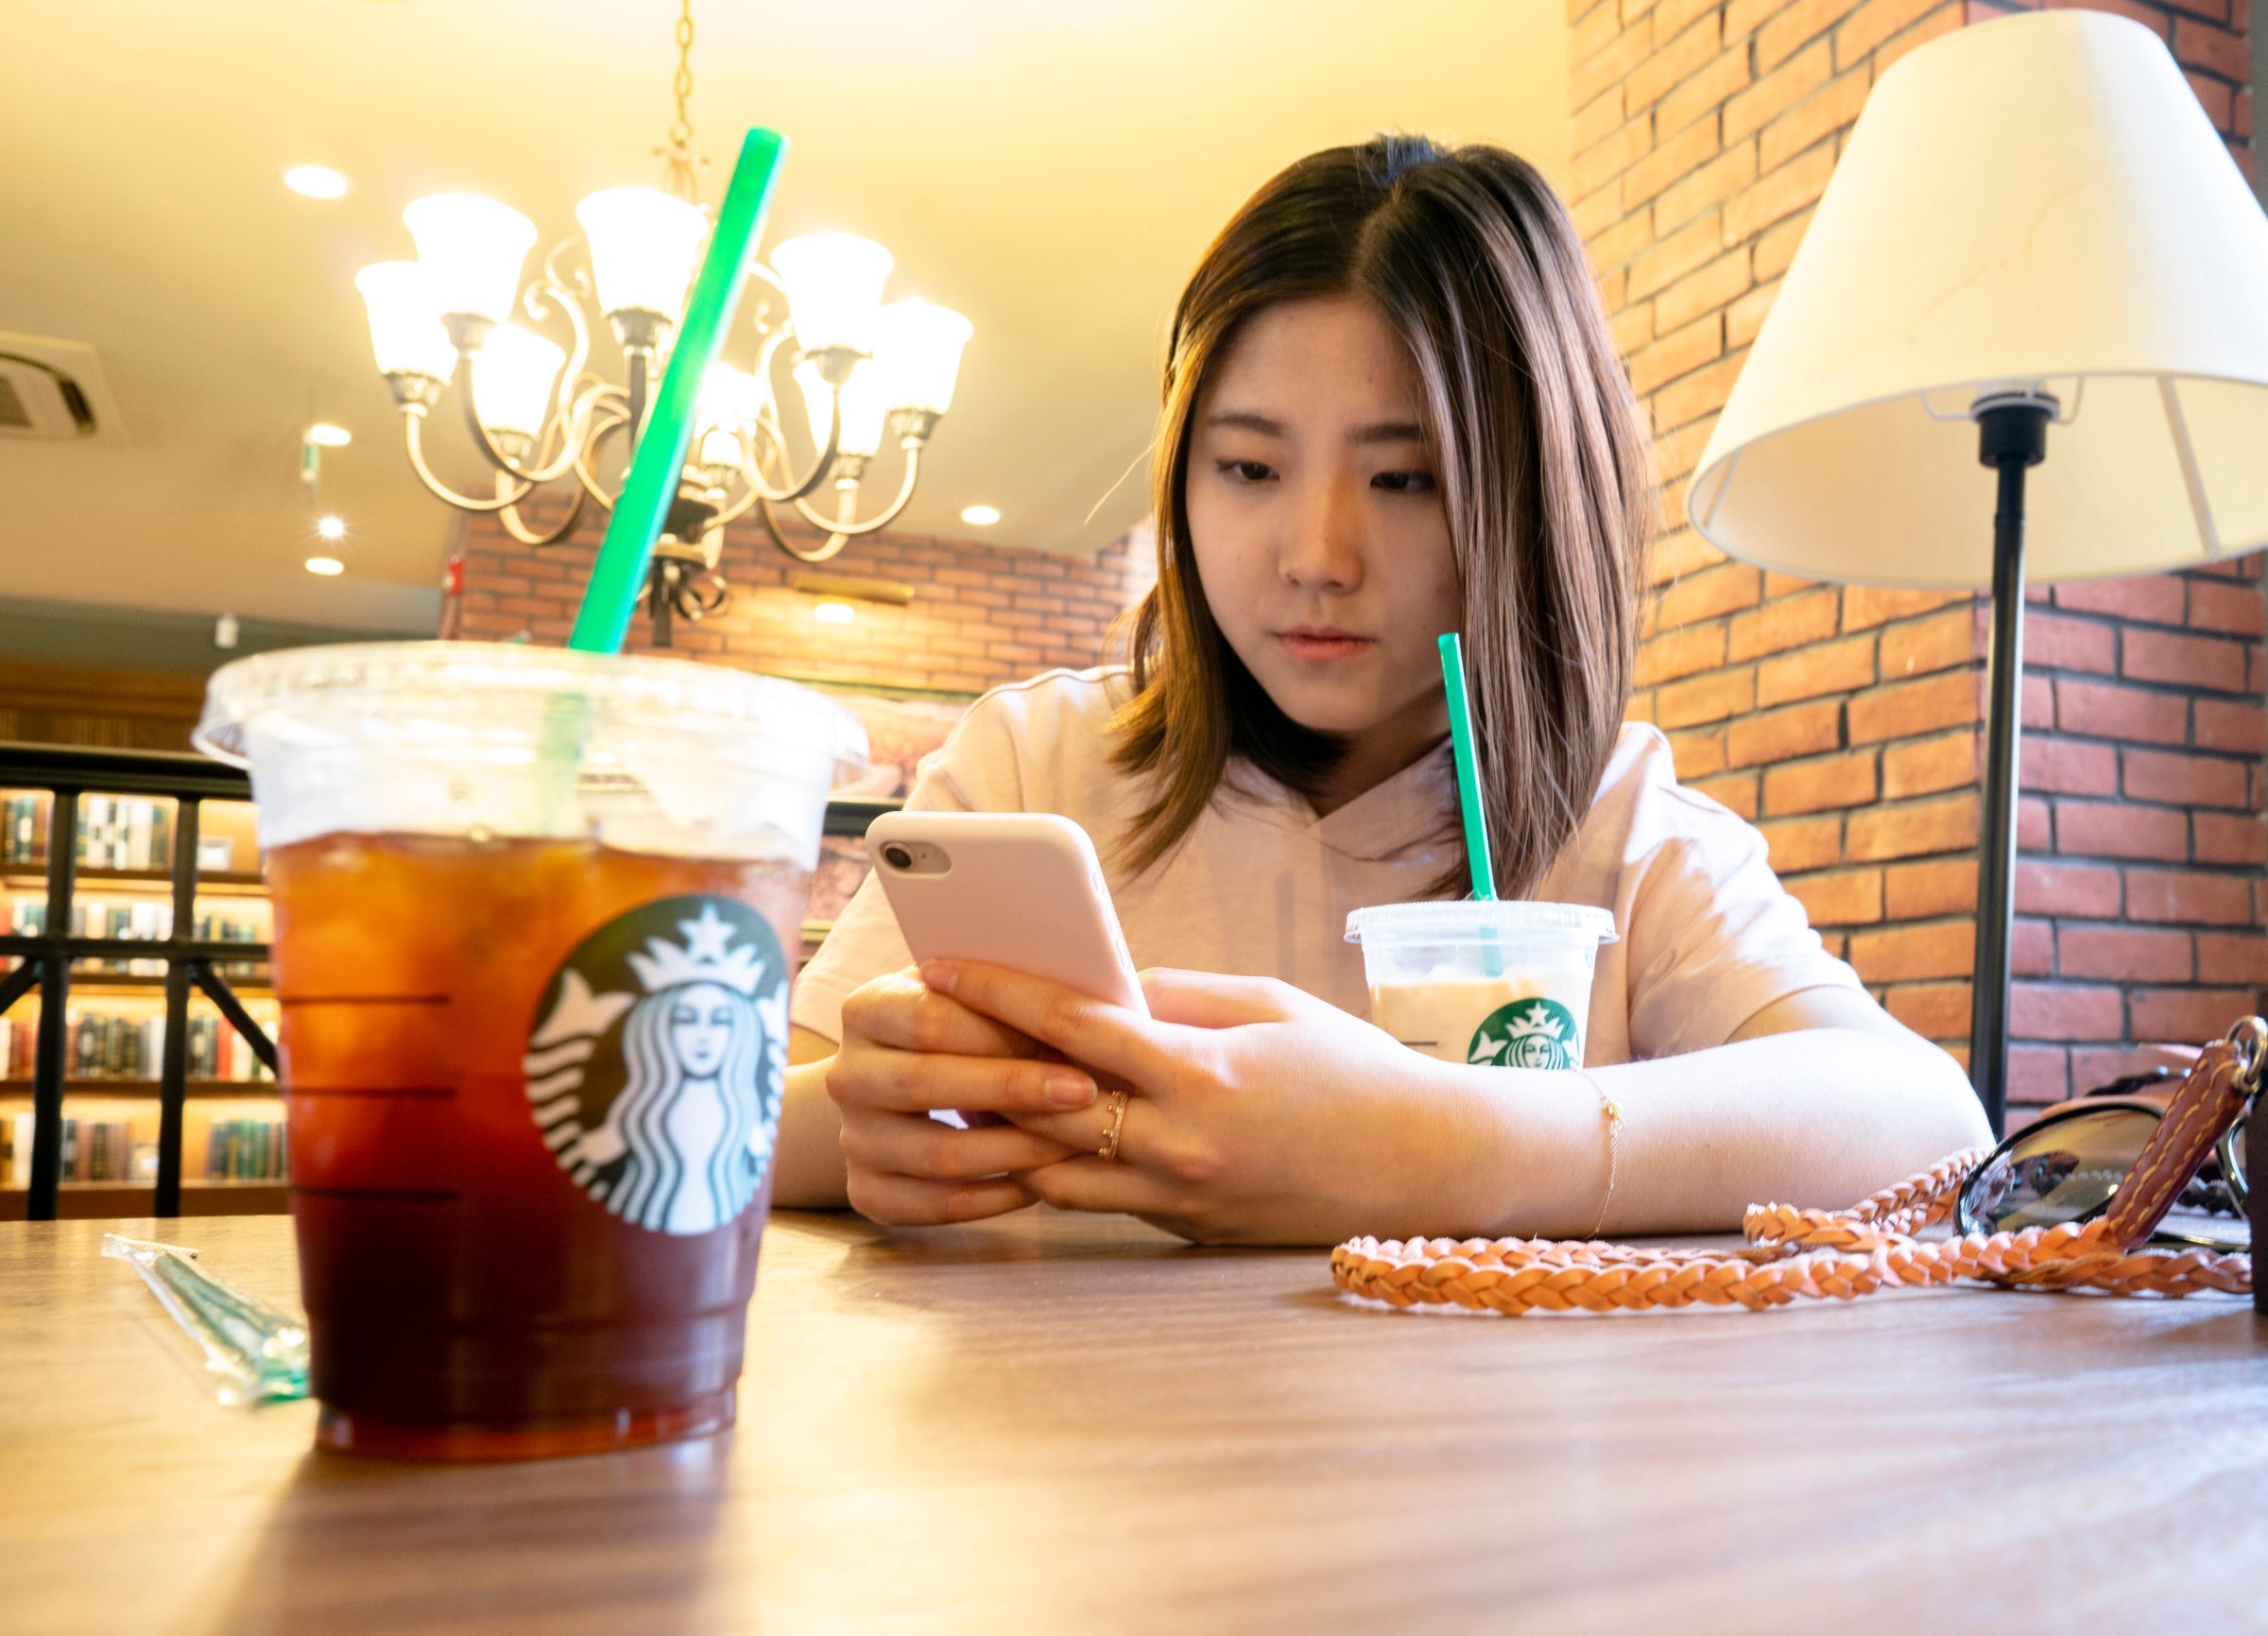 A girl is drinking ice coffee in a Starbucks coffee shop.